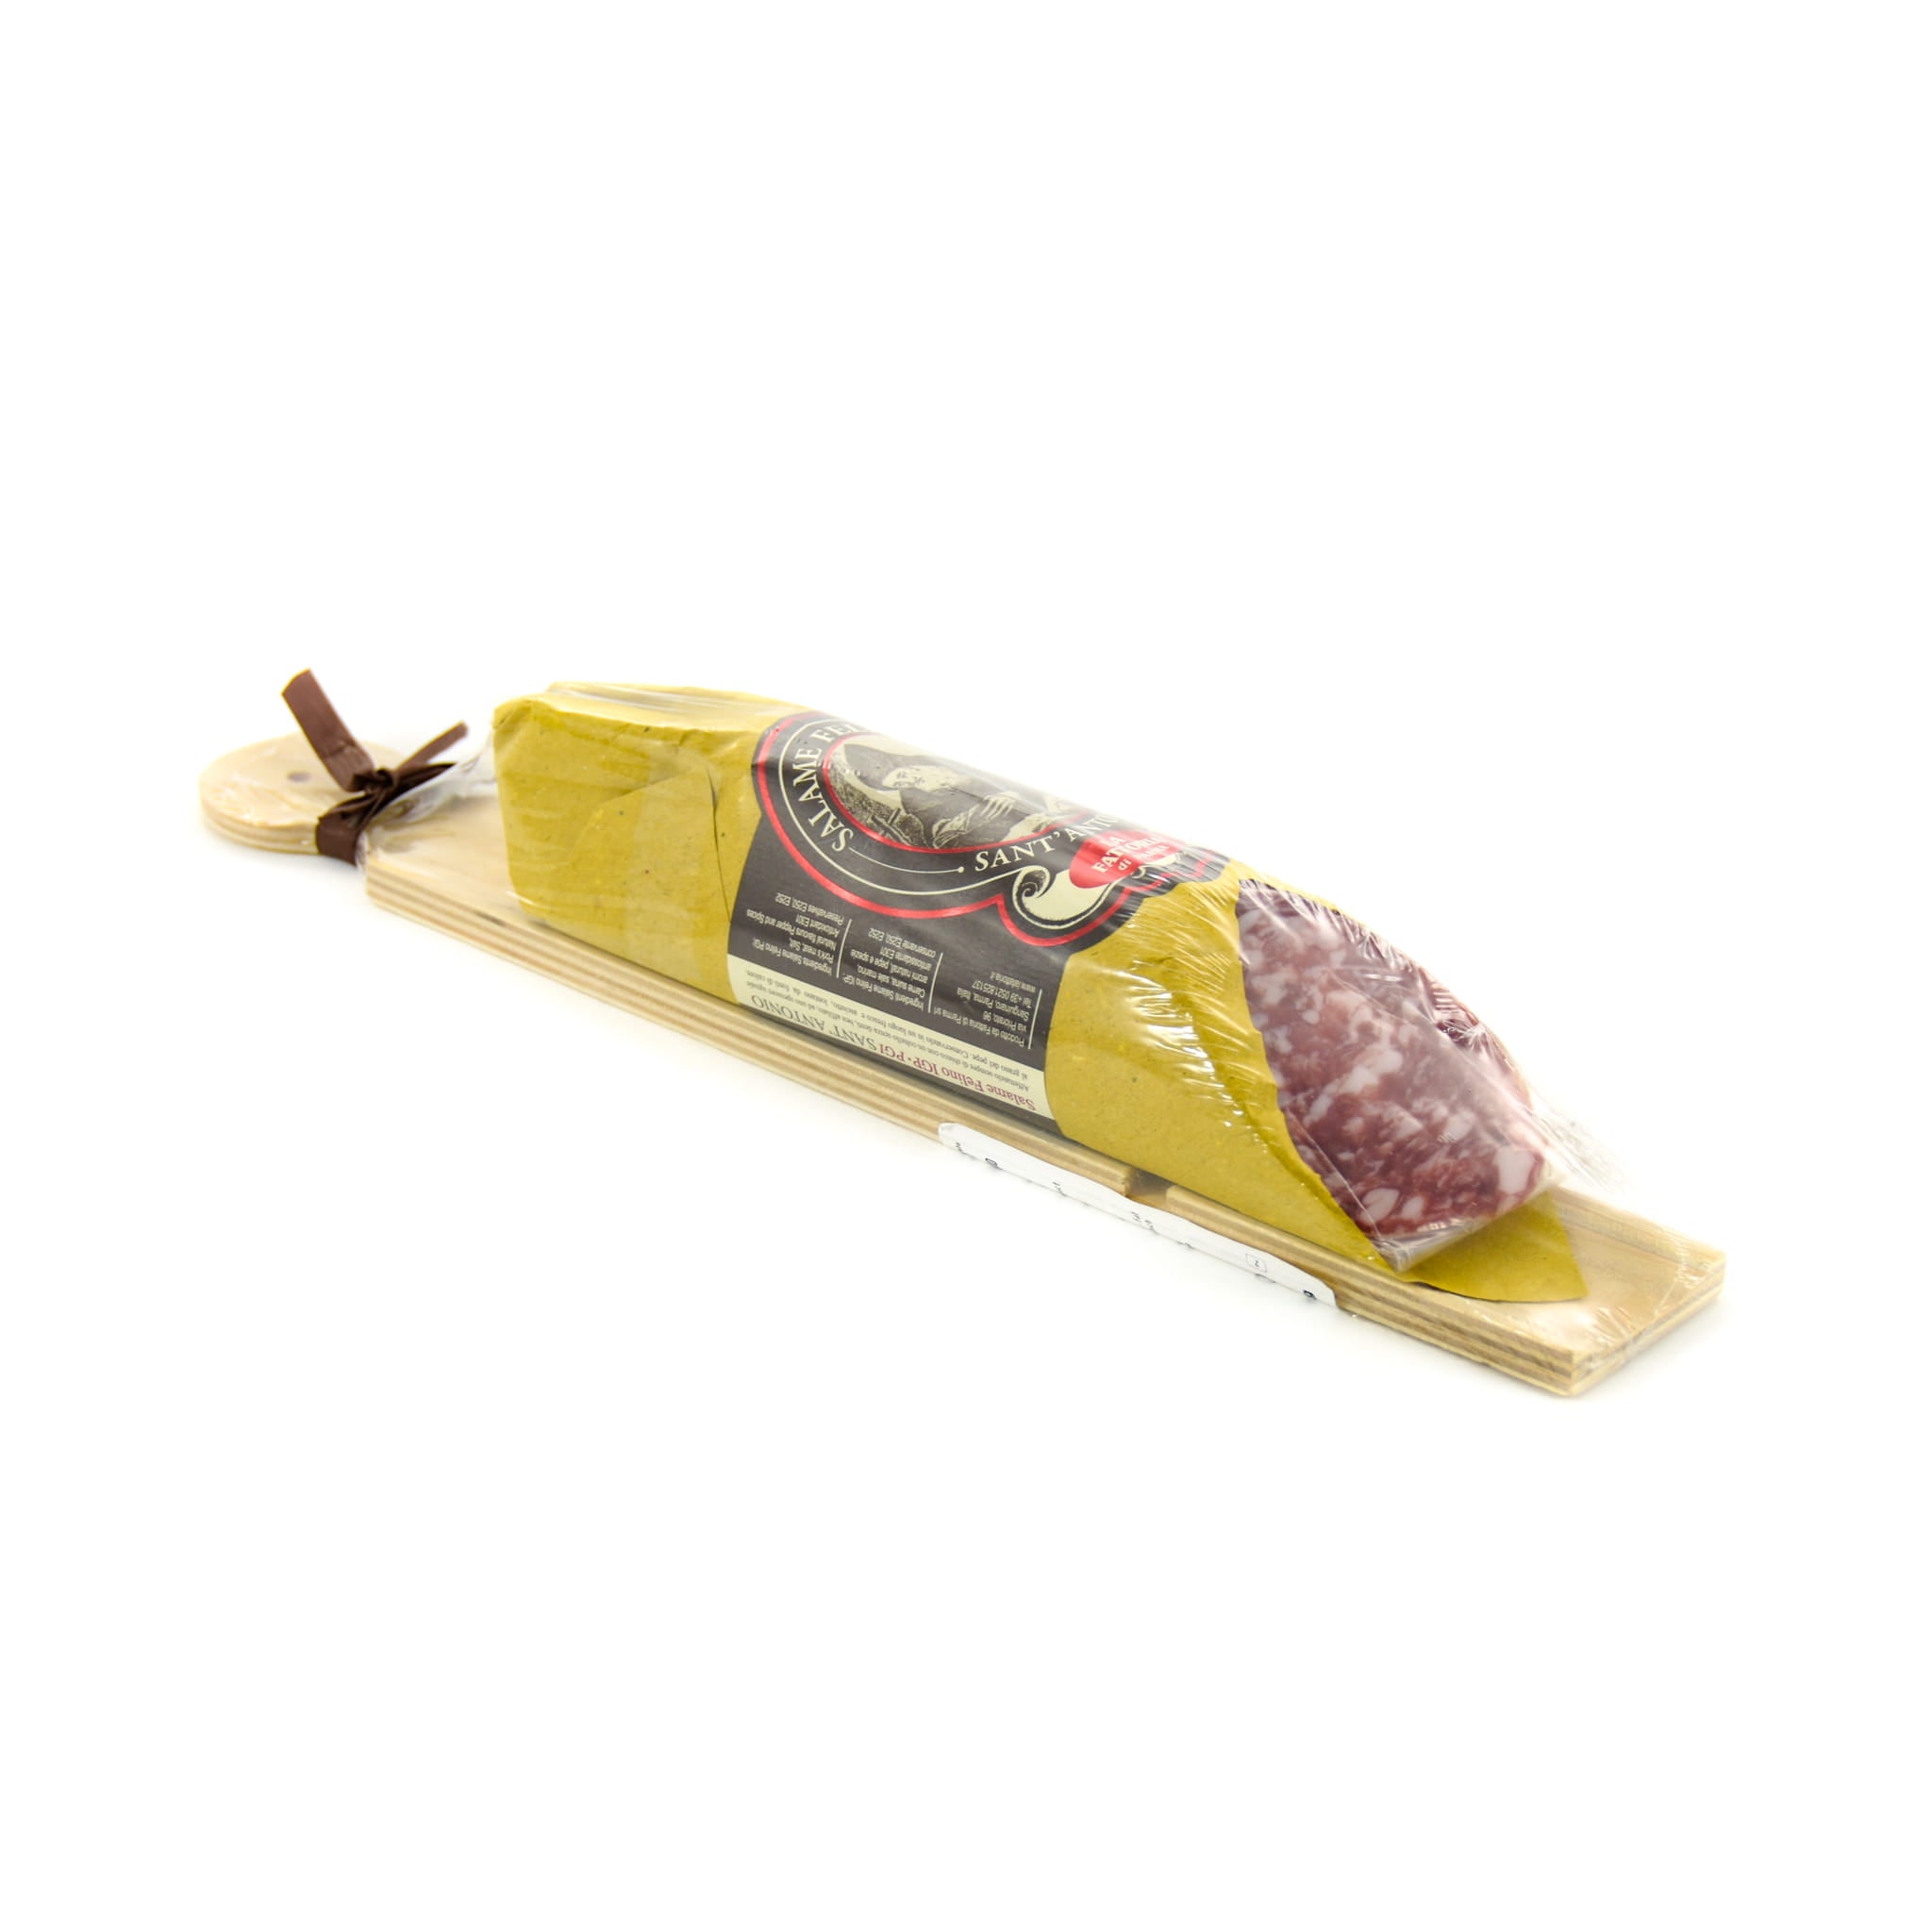 Salami Felino IGP Riserva with Wooden Carving Board, 300g